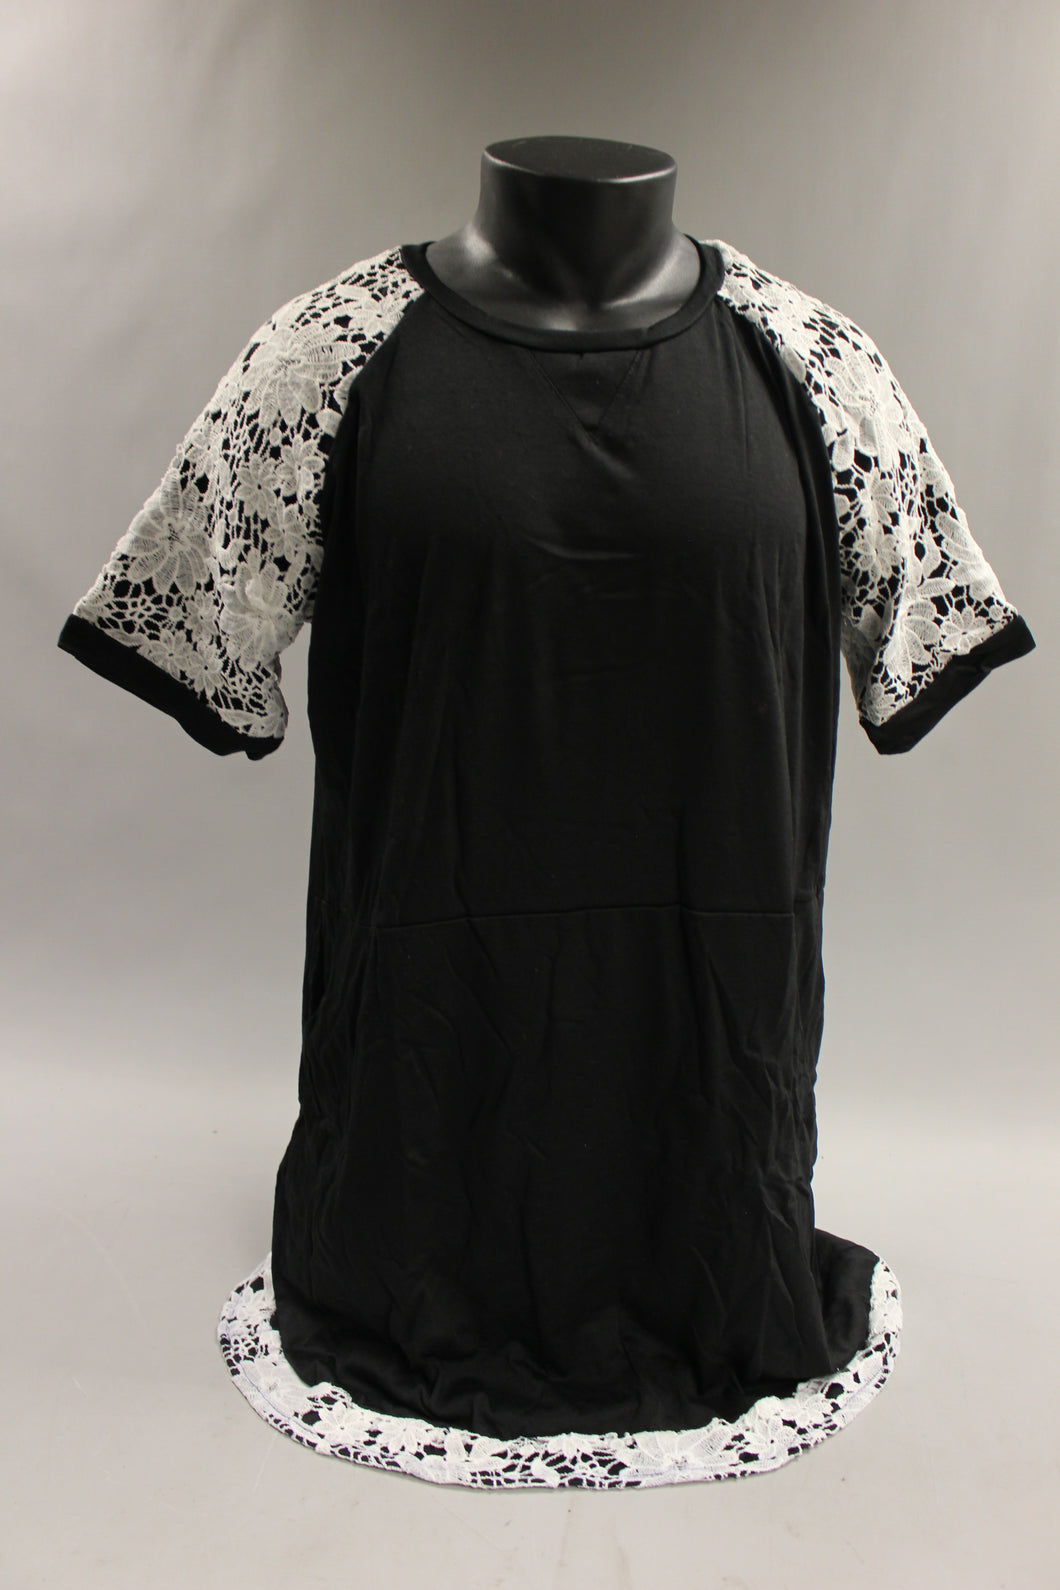 Meaneor Women's Casual Short Sleeve Pullover Dress Size S XXL -Black/White -New